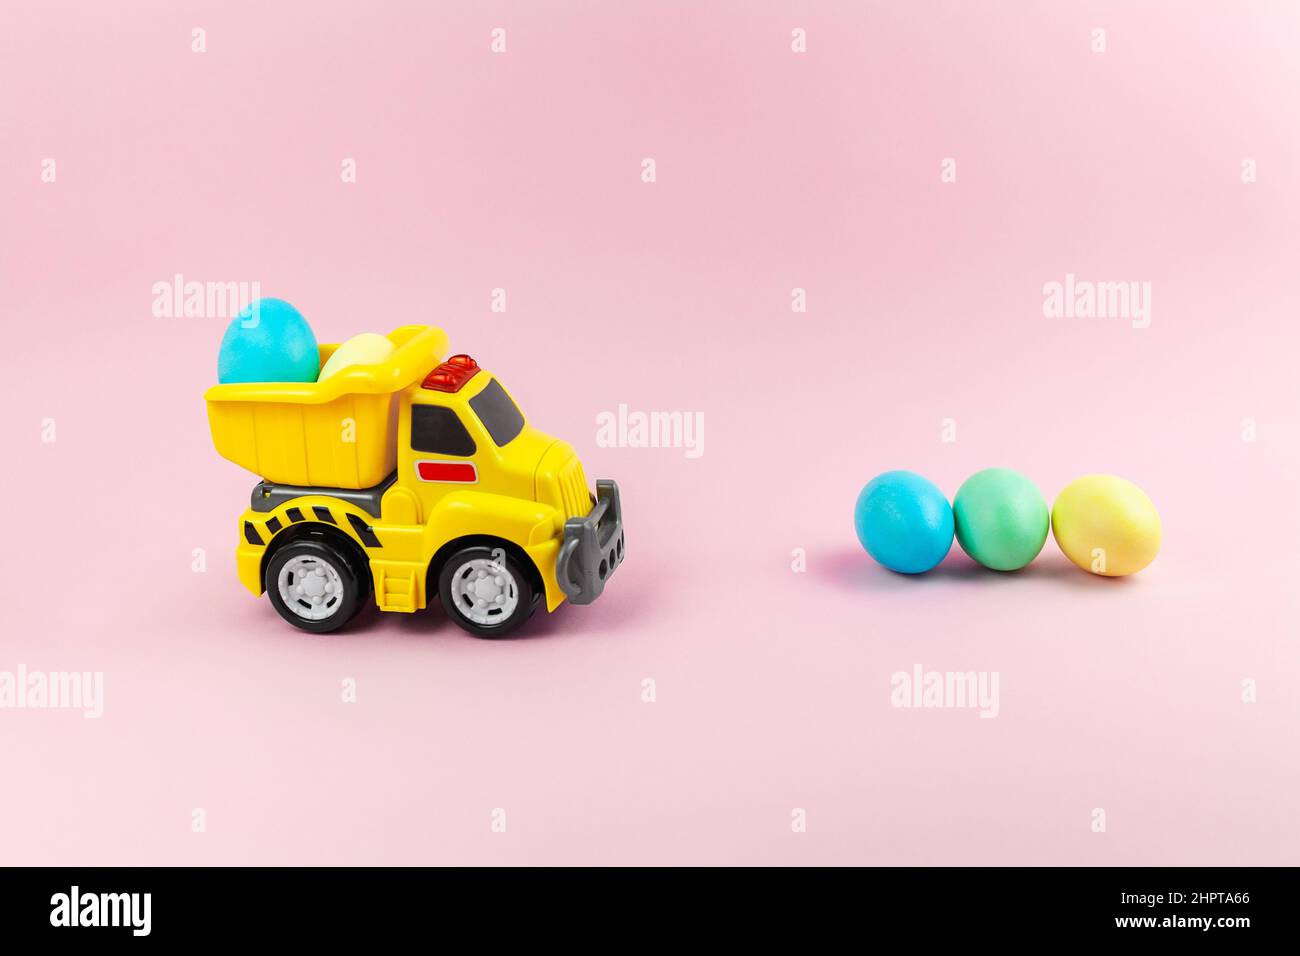 A toy yellow truck carrying Easter eggs in pastel colors. Easter card with place for text on a pink background. Easter food delivery Stock Photo